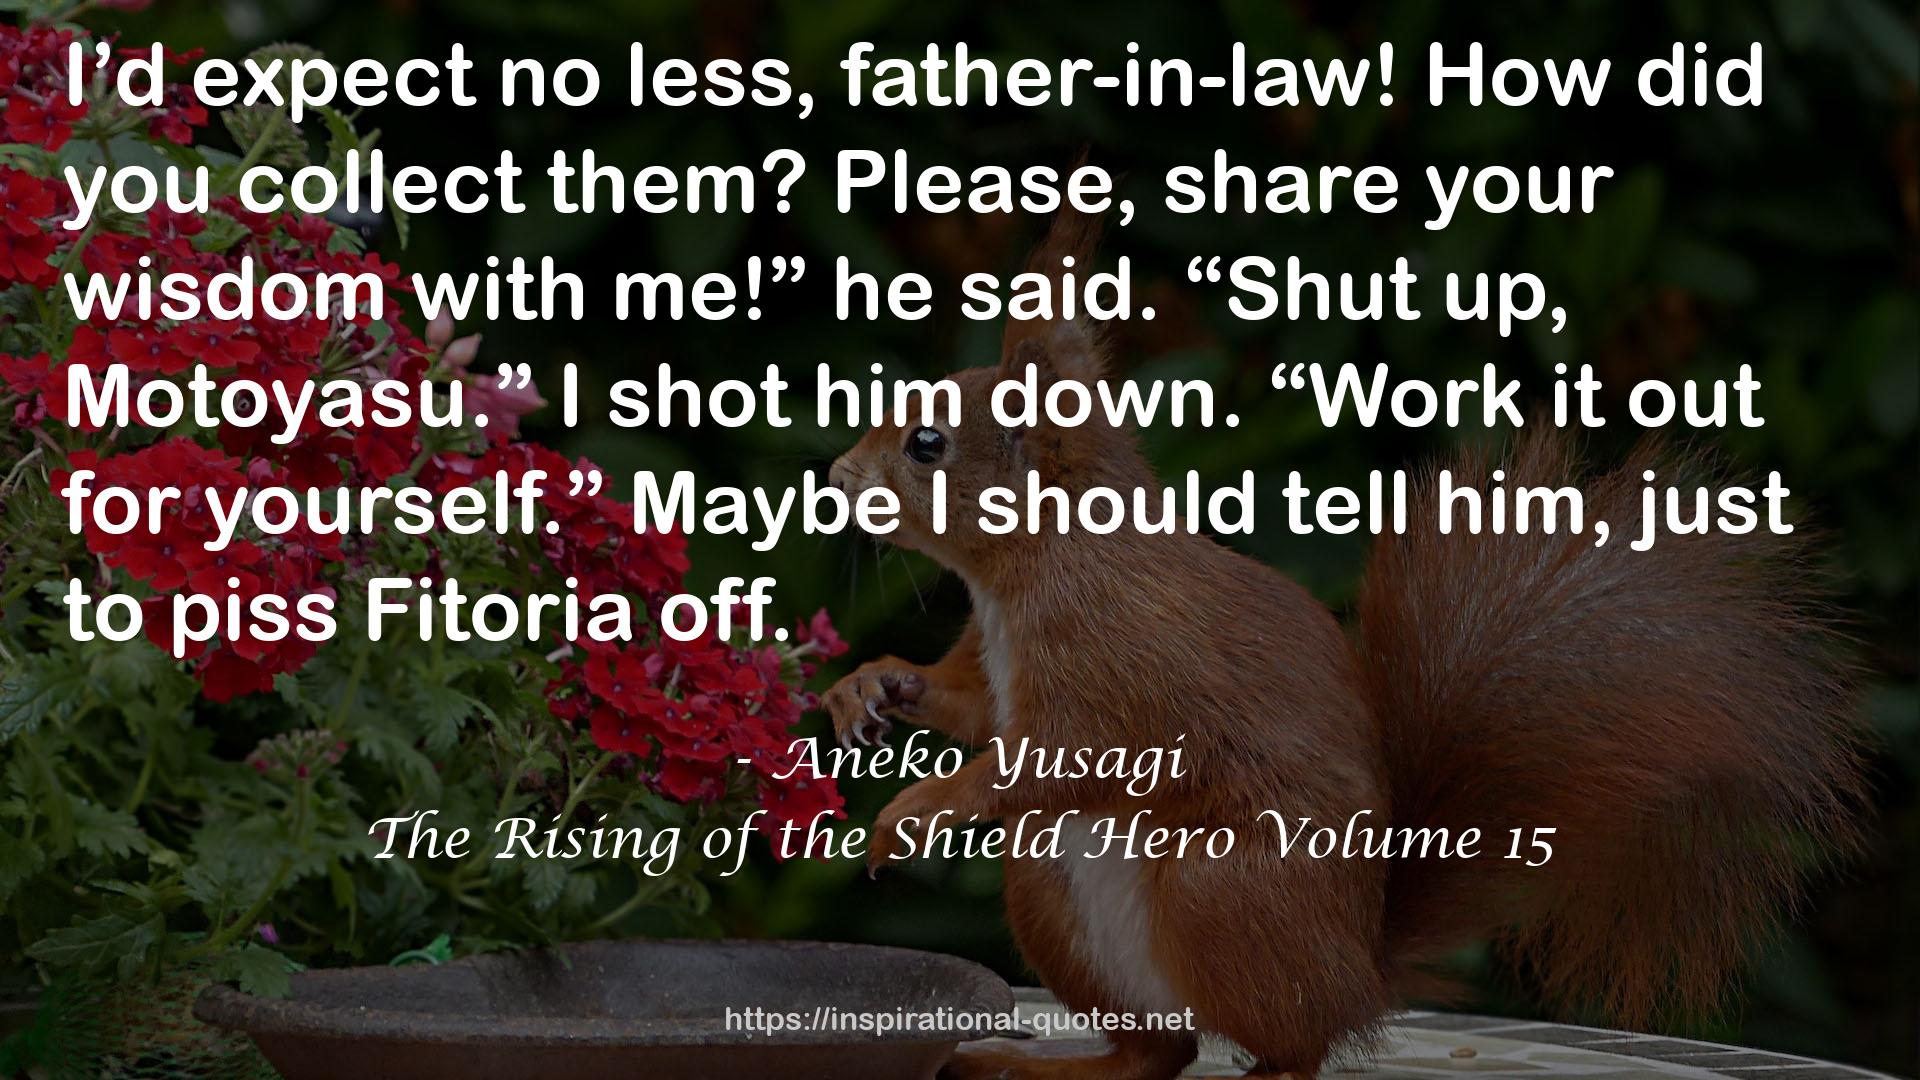 The Rising of the Shield Hero Volume 15 QUOTES